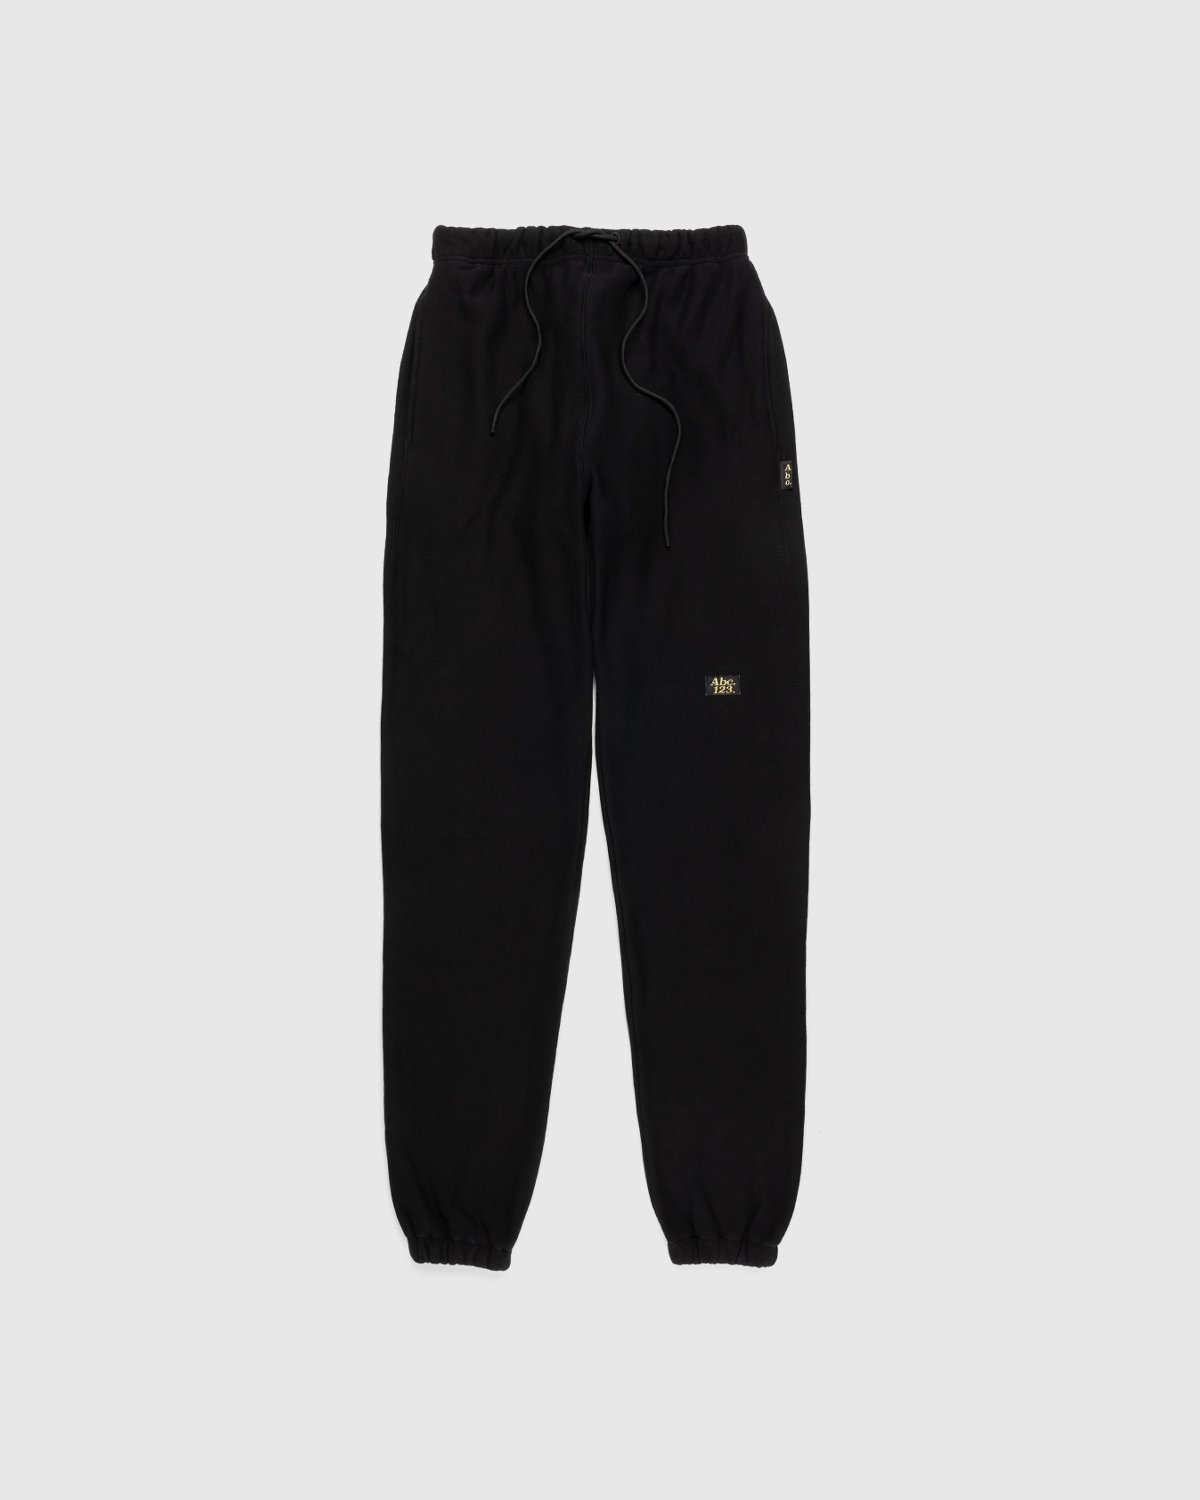 Abc. - French Terry Sweatpants Anthracite - Clothing - Black - Image 1